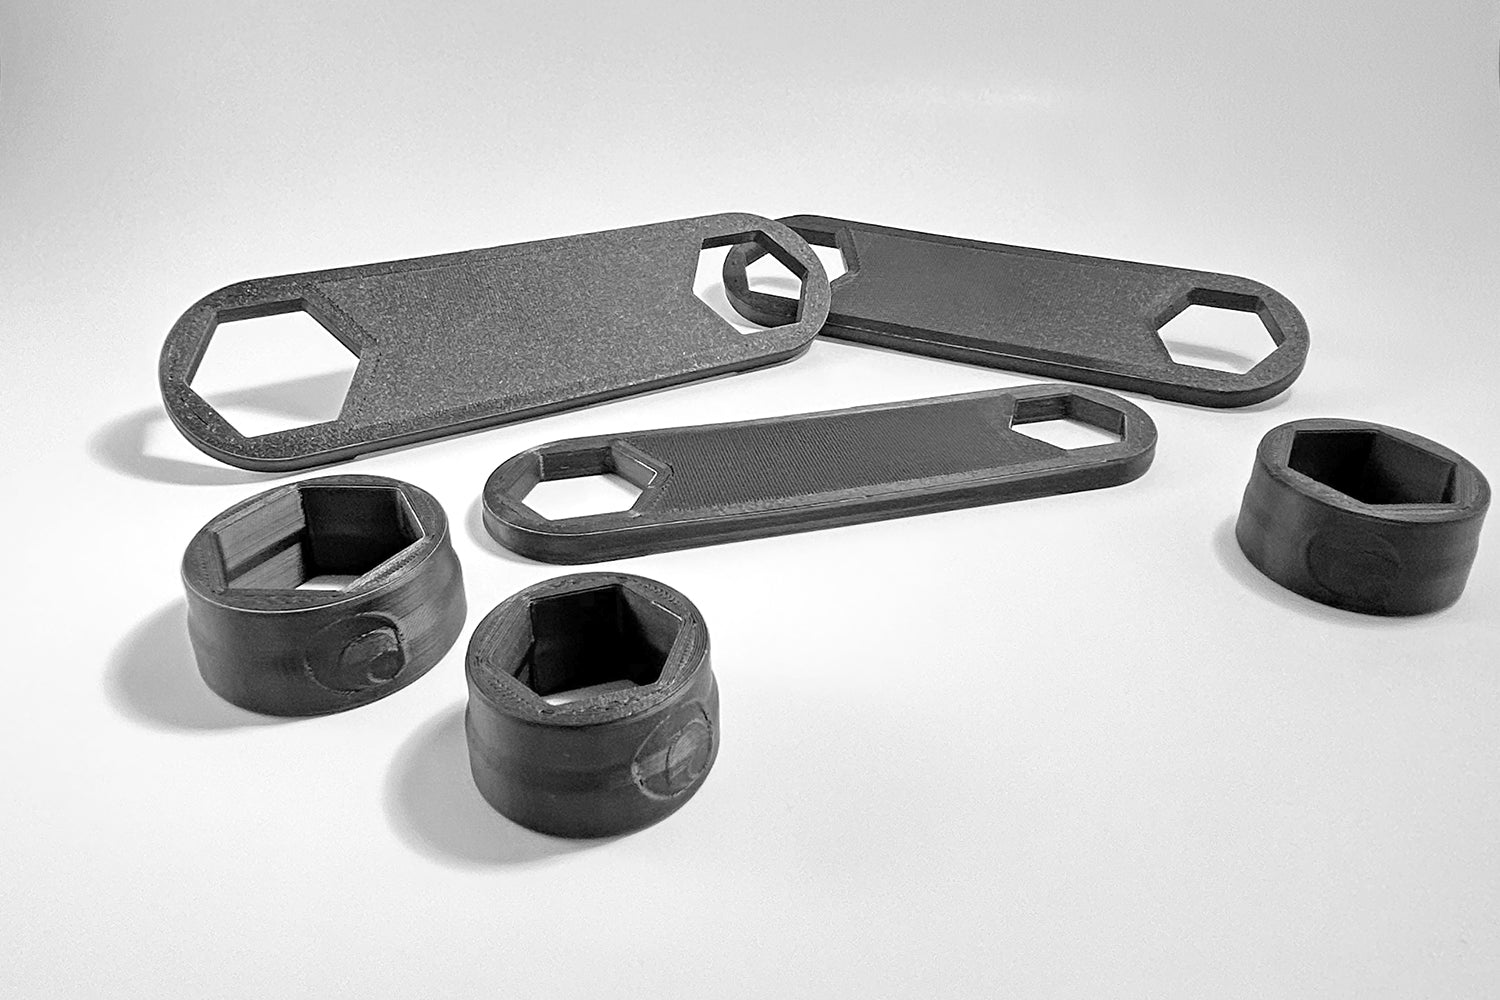 Full Set: Flat Spanners and Hand Sockets. A must-have 3D printed suspension tools made for the Home Mechanics!